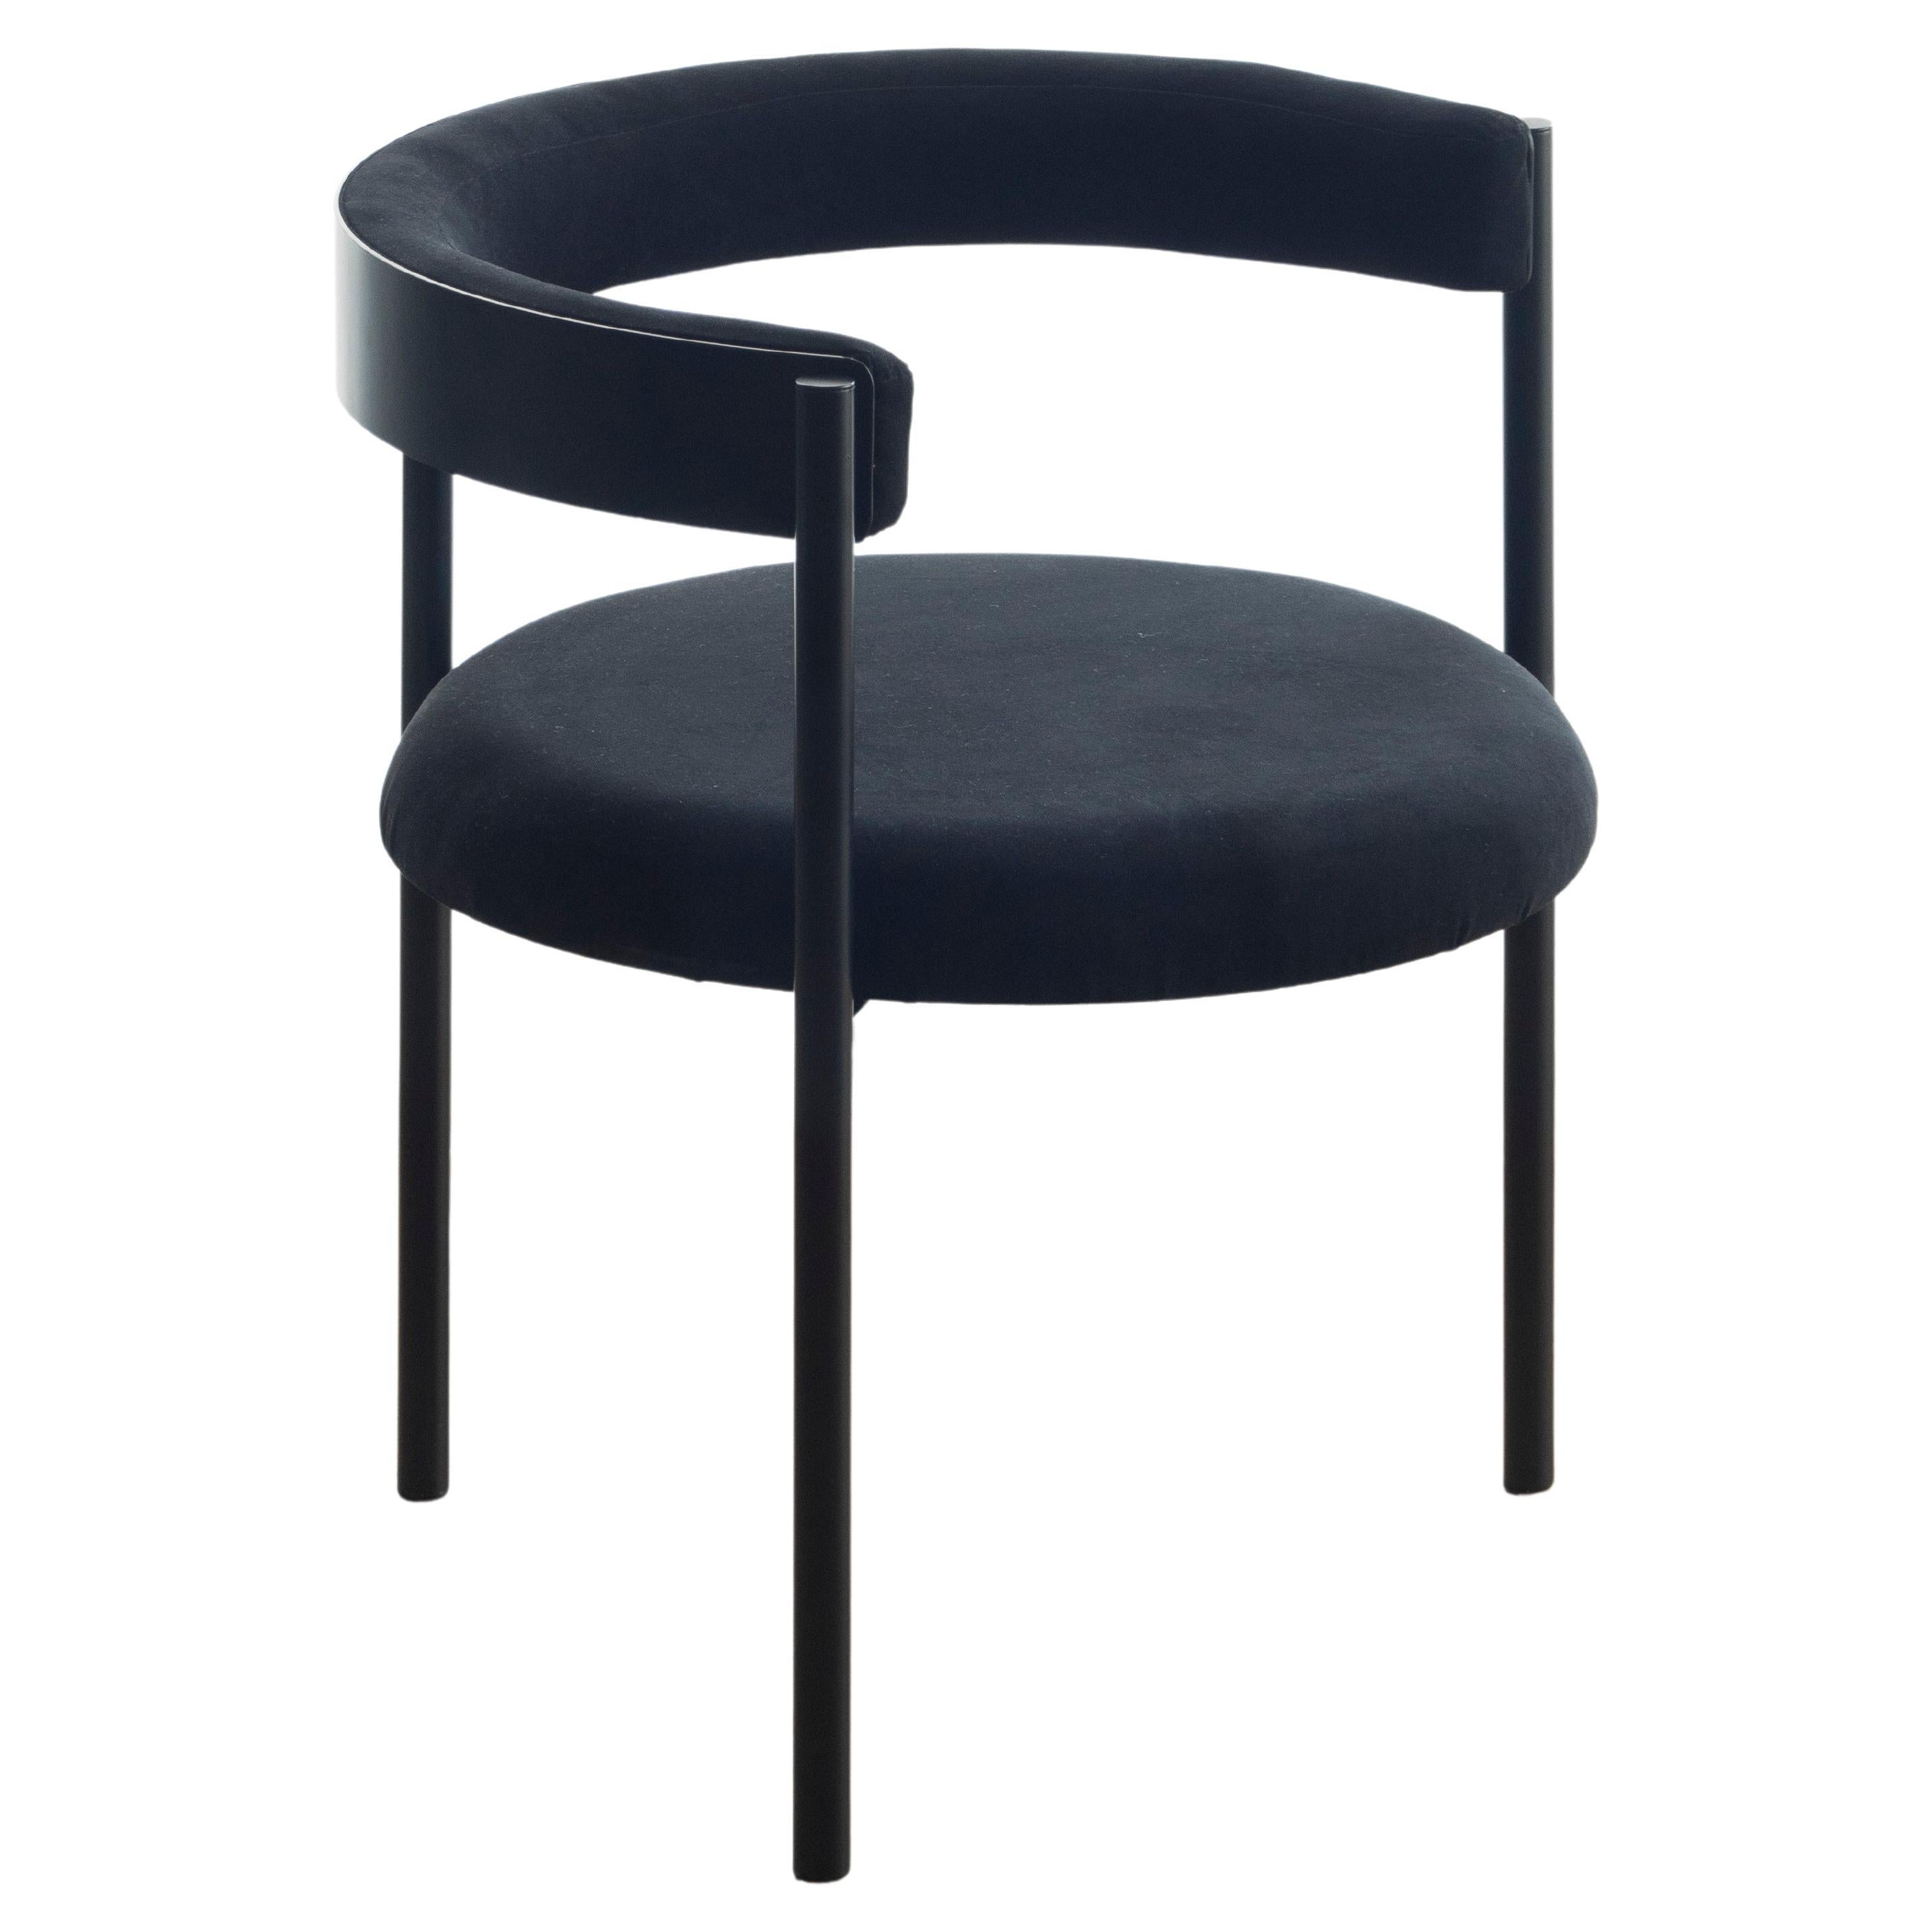 Aro Chair, Black by Ries